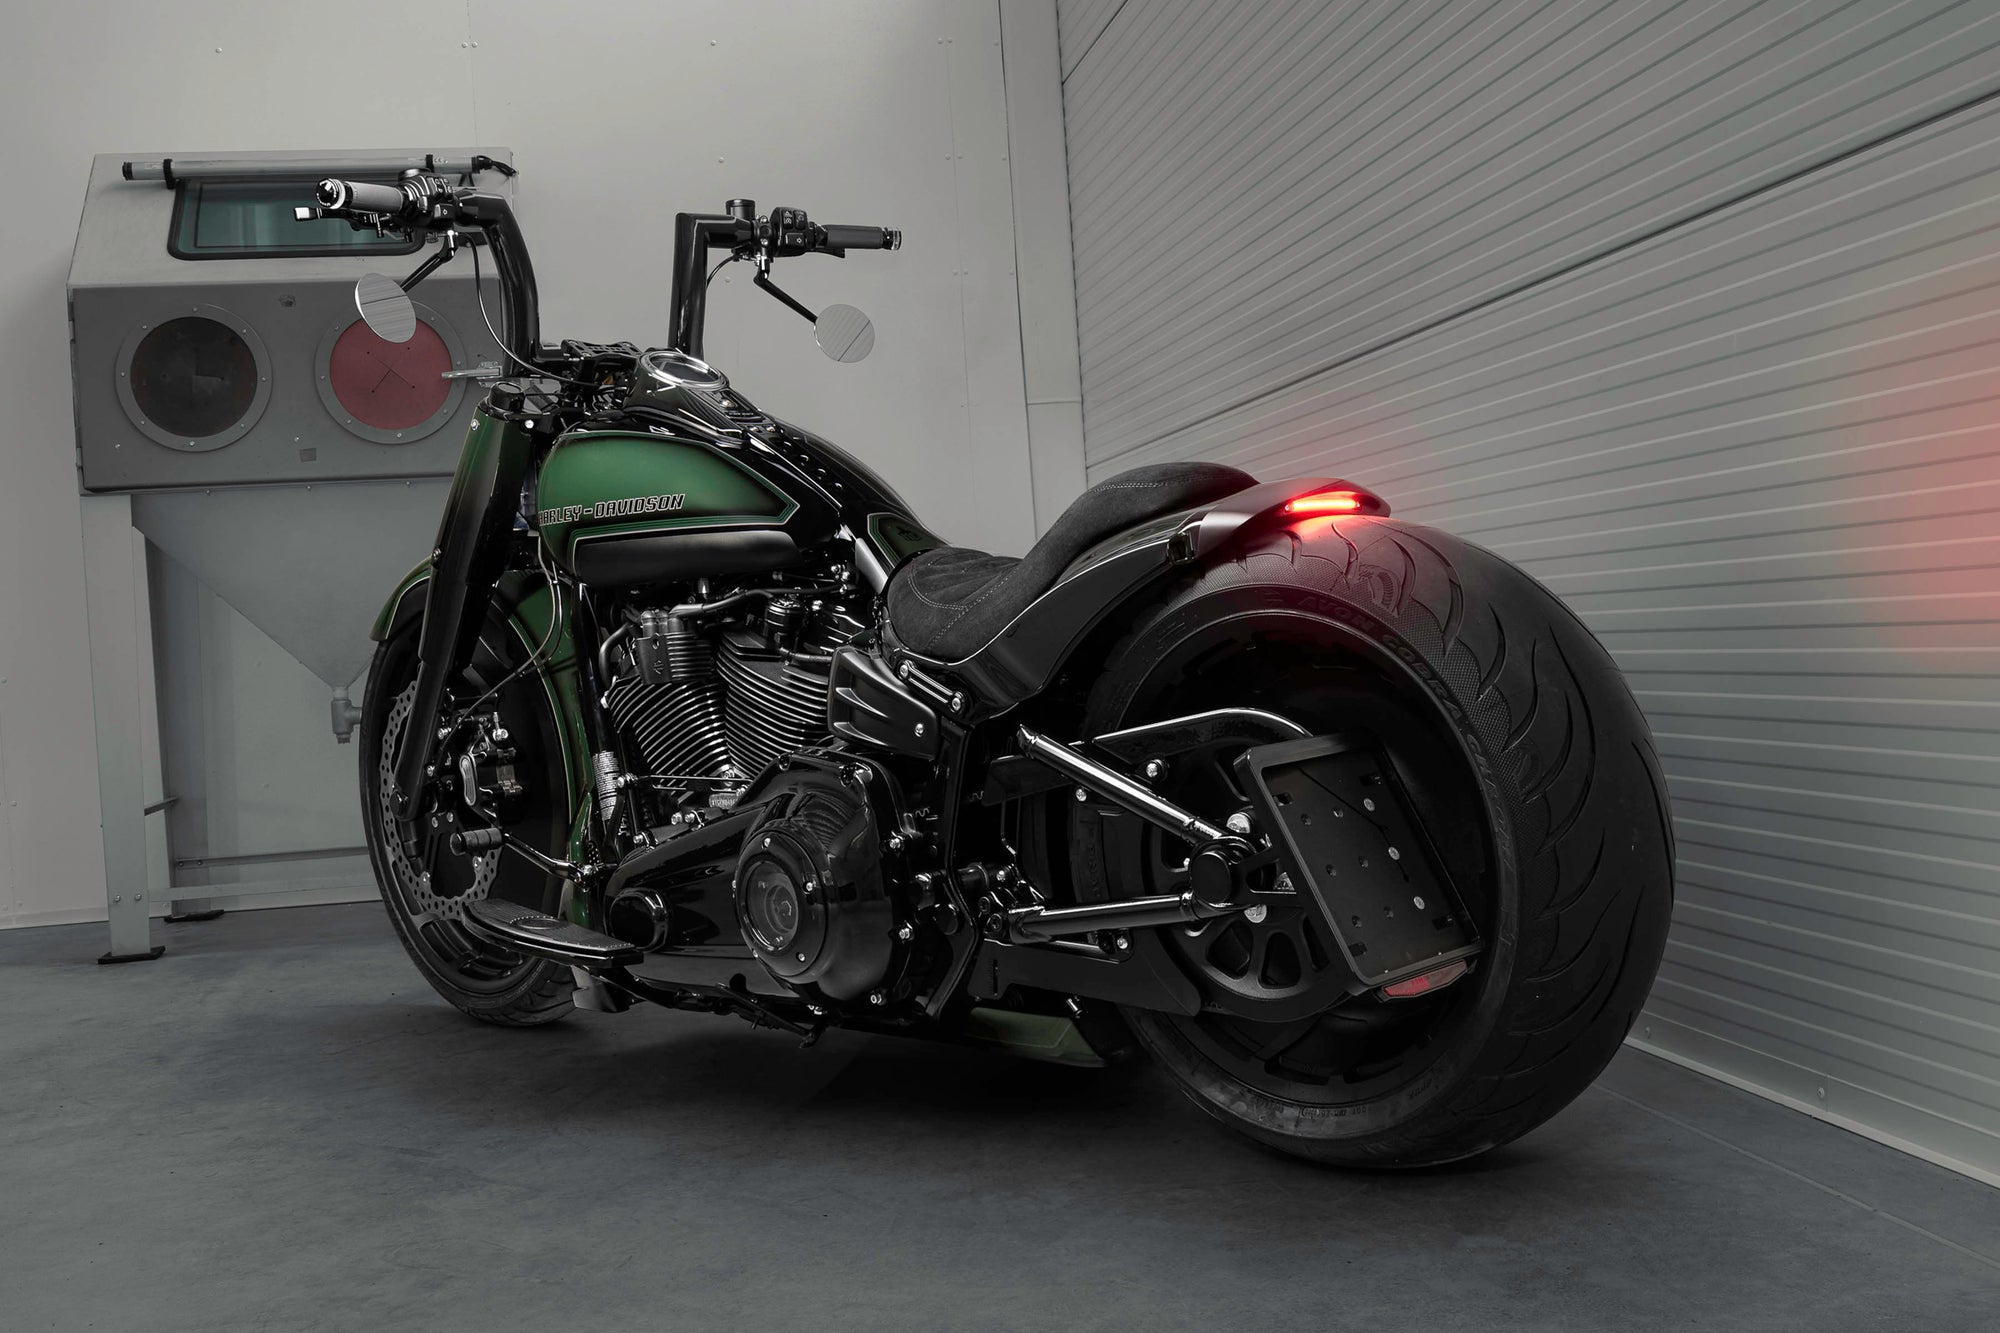 Harley Davidson motorcycle with Killer Custom parts from the side in a spacious and modern garage